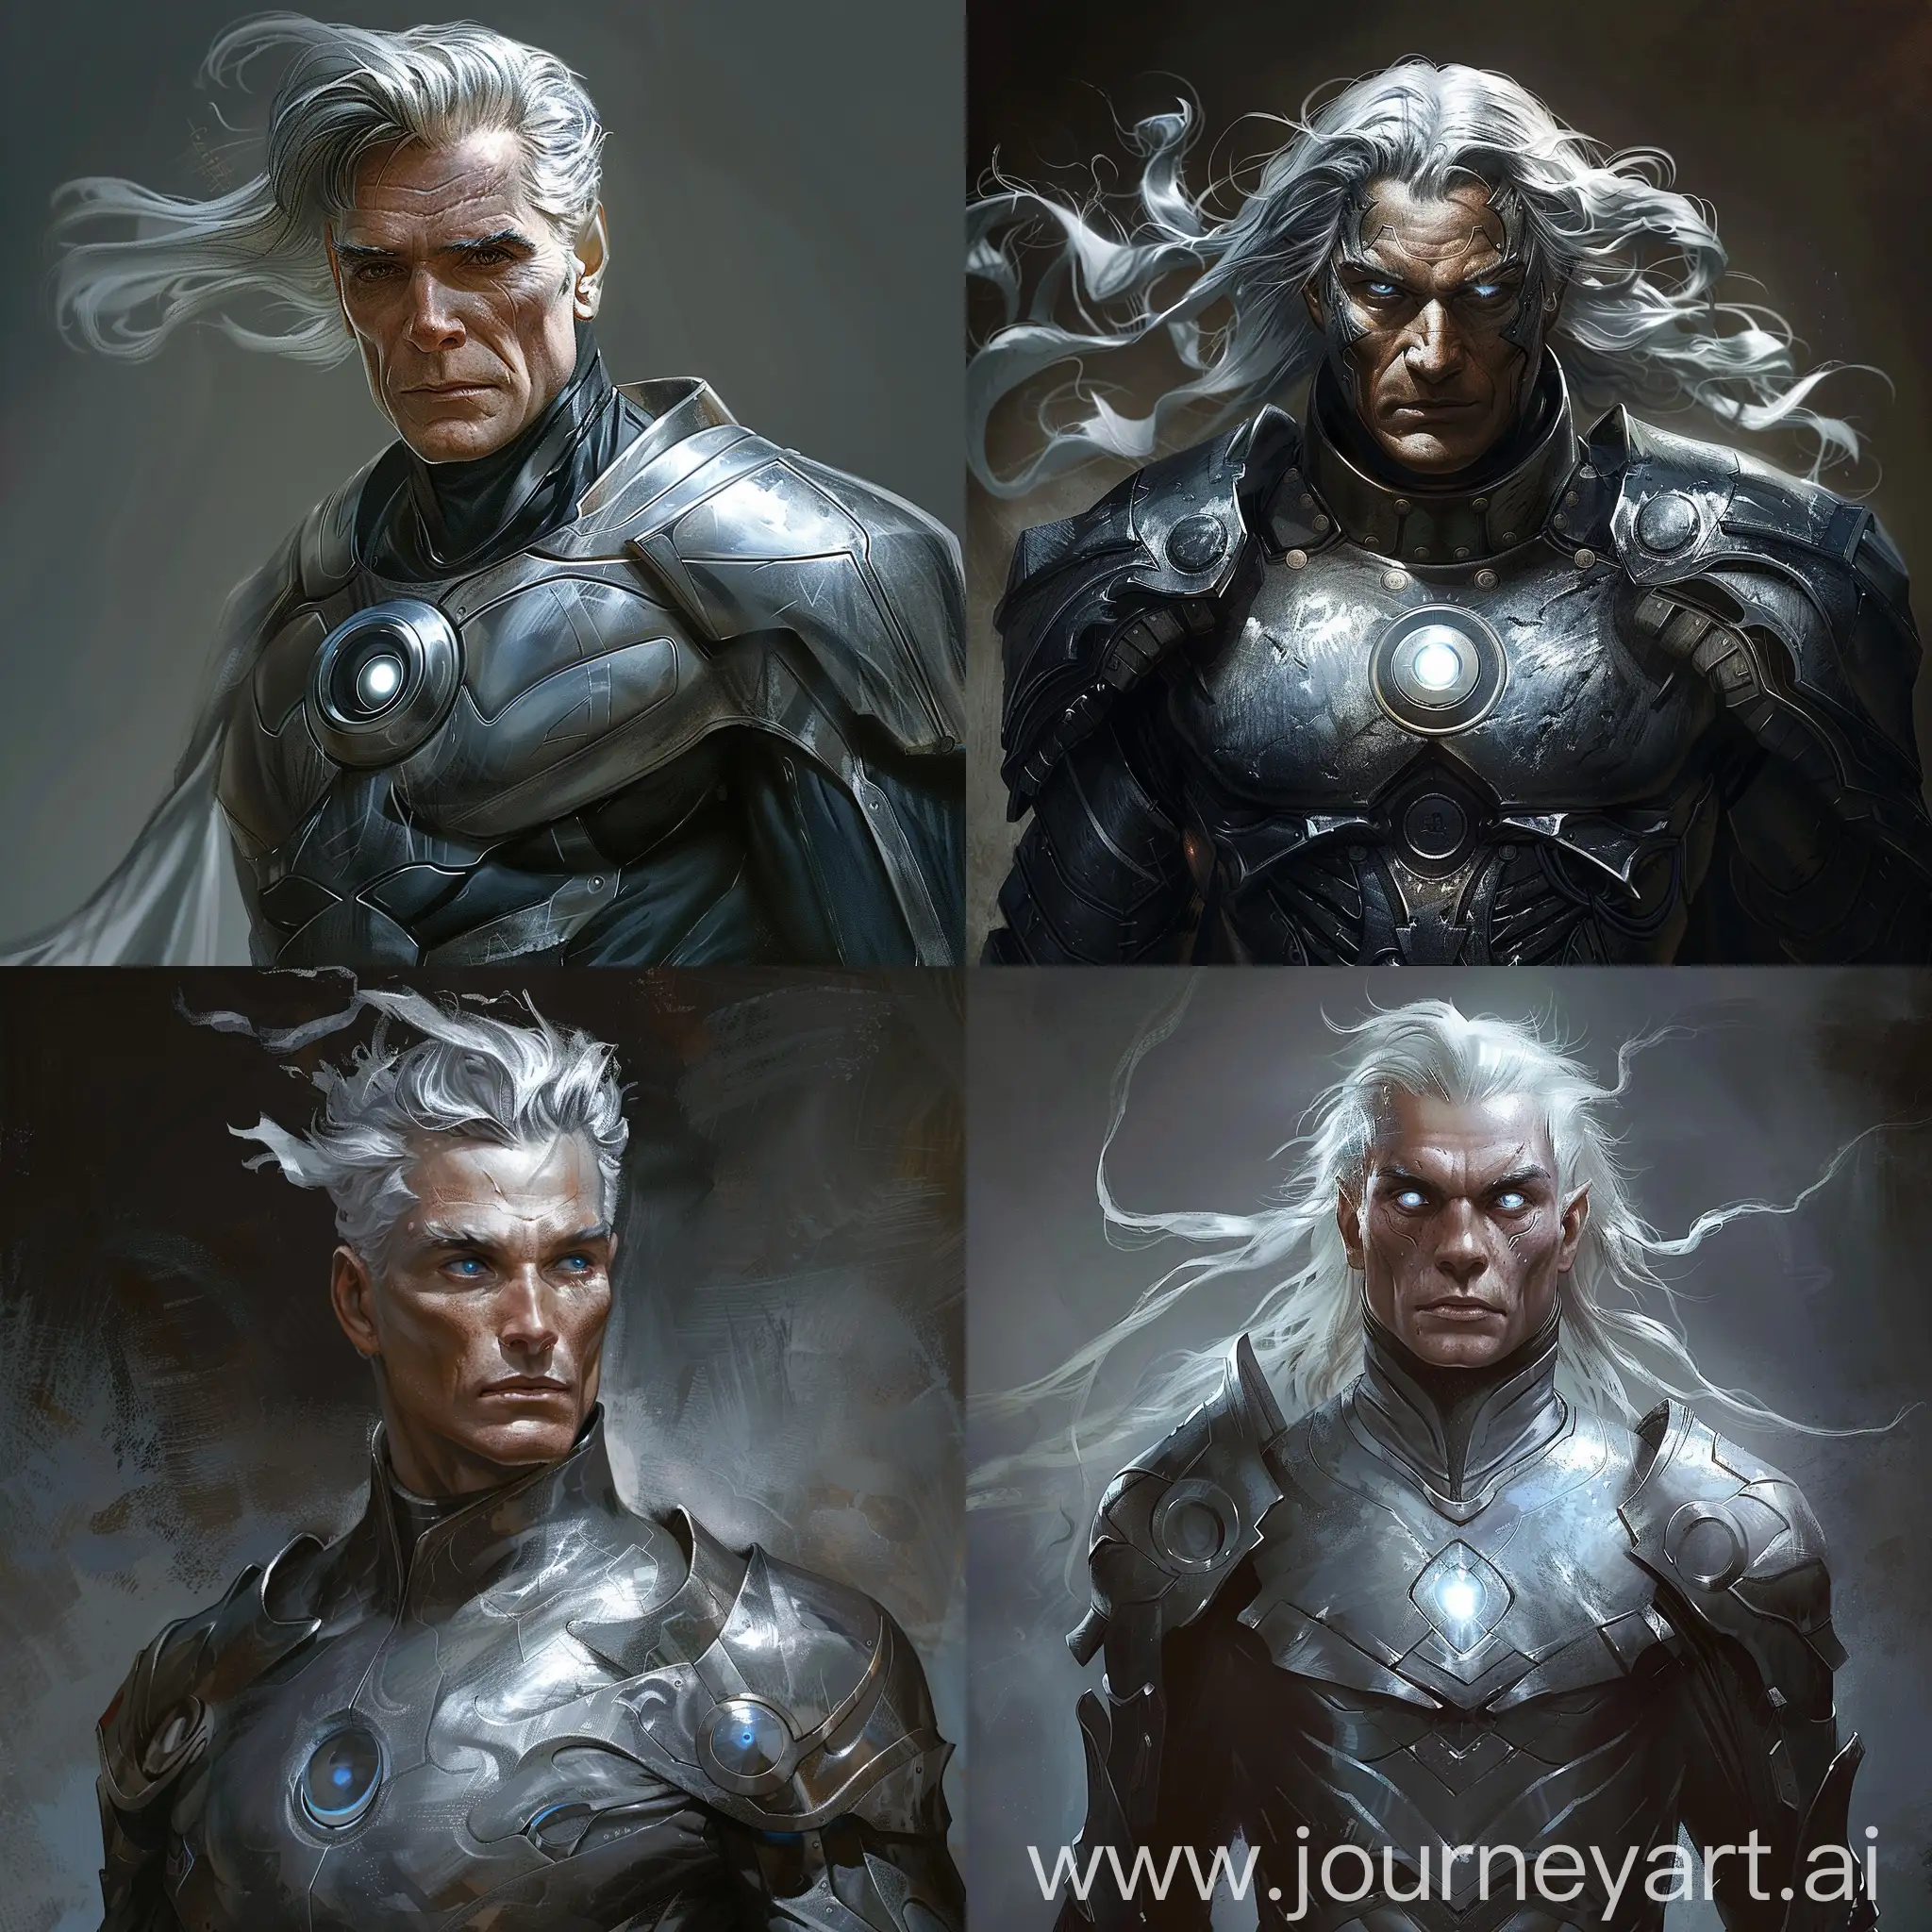 SilverGray-Haired-Magnetic-Warrior-in-Gothic-Fantasy-Realm